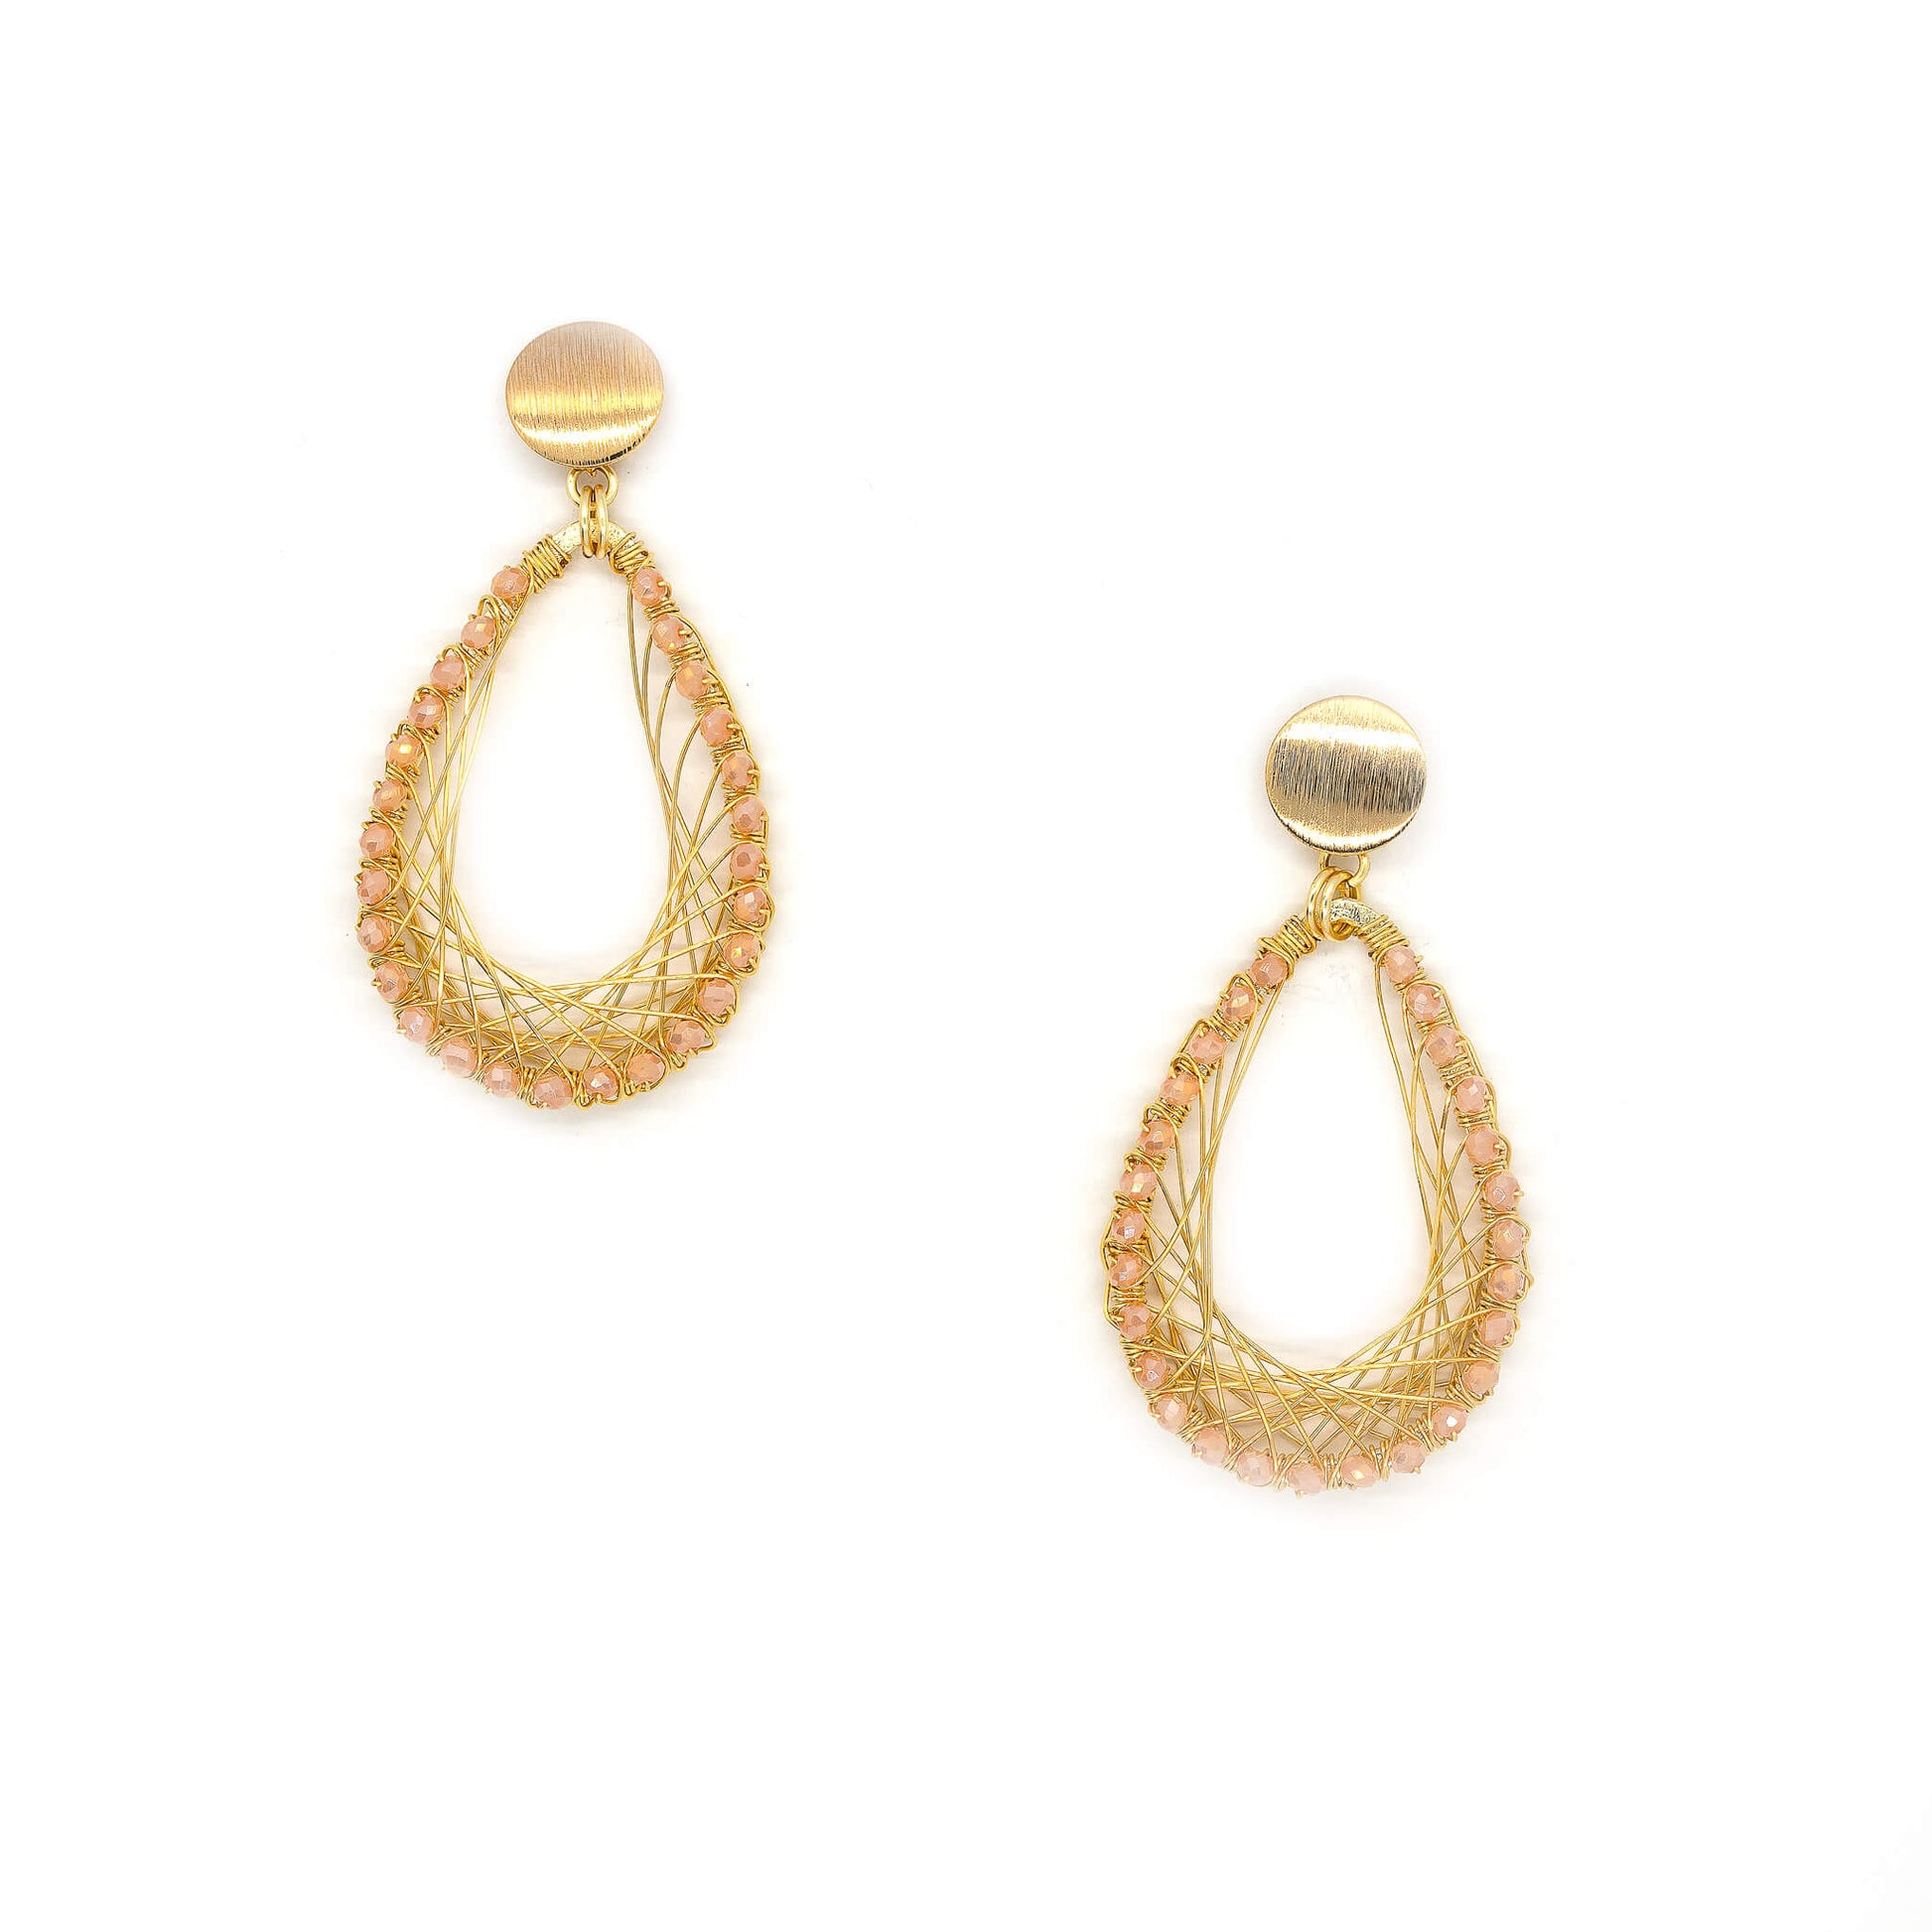 Barsha  Earrings are 2.5 inches long. Gold and Peach earrings. Beaded Teardrop Earrings. Handmade with non-tarnish wire, Crystal Beads, and a metal frame. Dangle Wire Earrings.